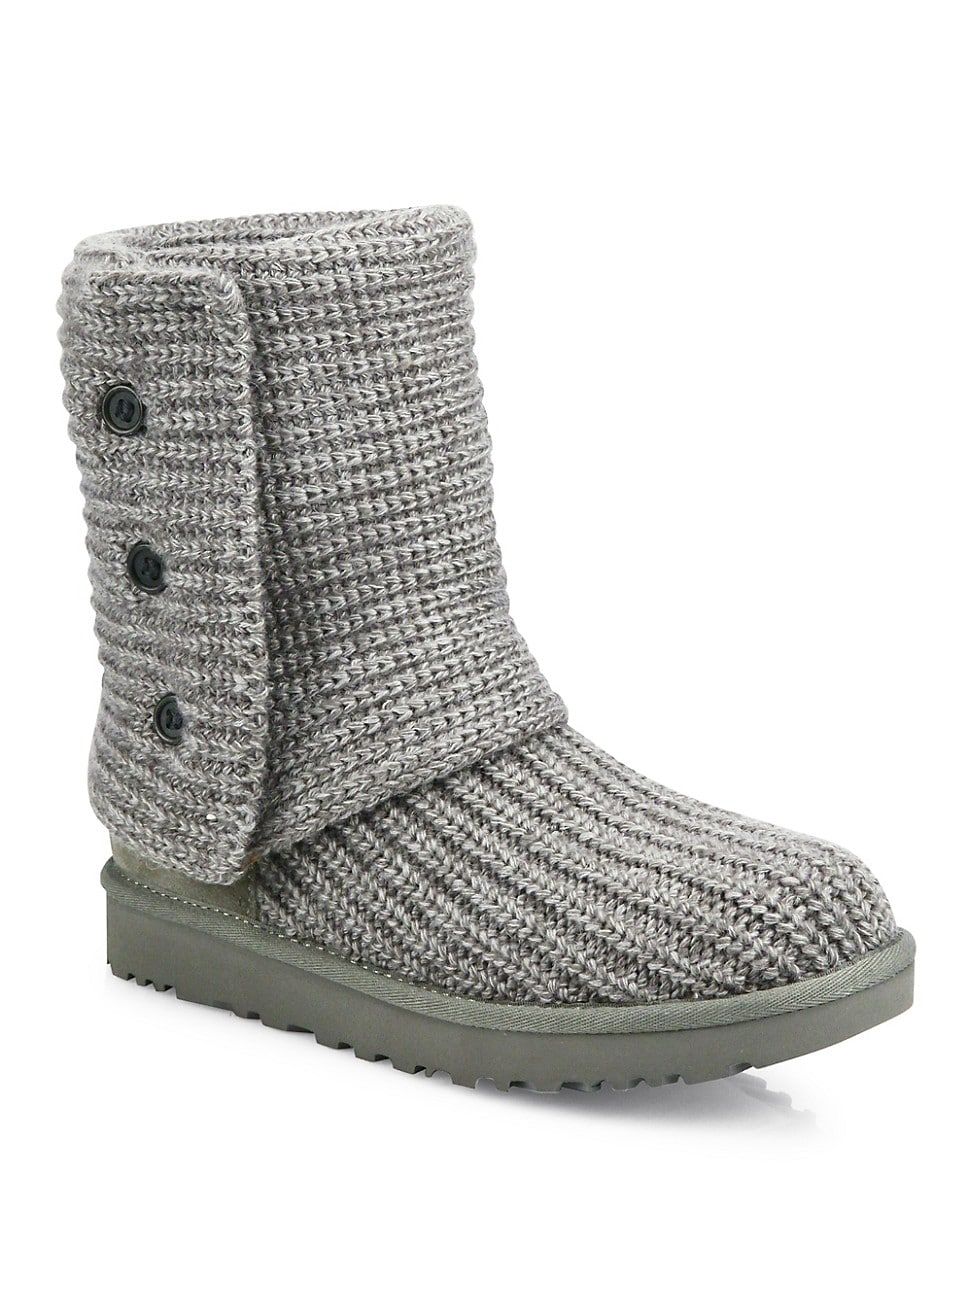 UGG Women's Cardy Knit Boots - Grey - Size 7 | Saks Fifth Avenue